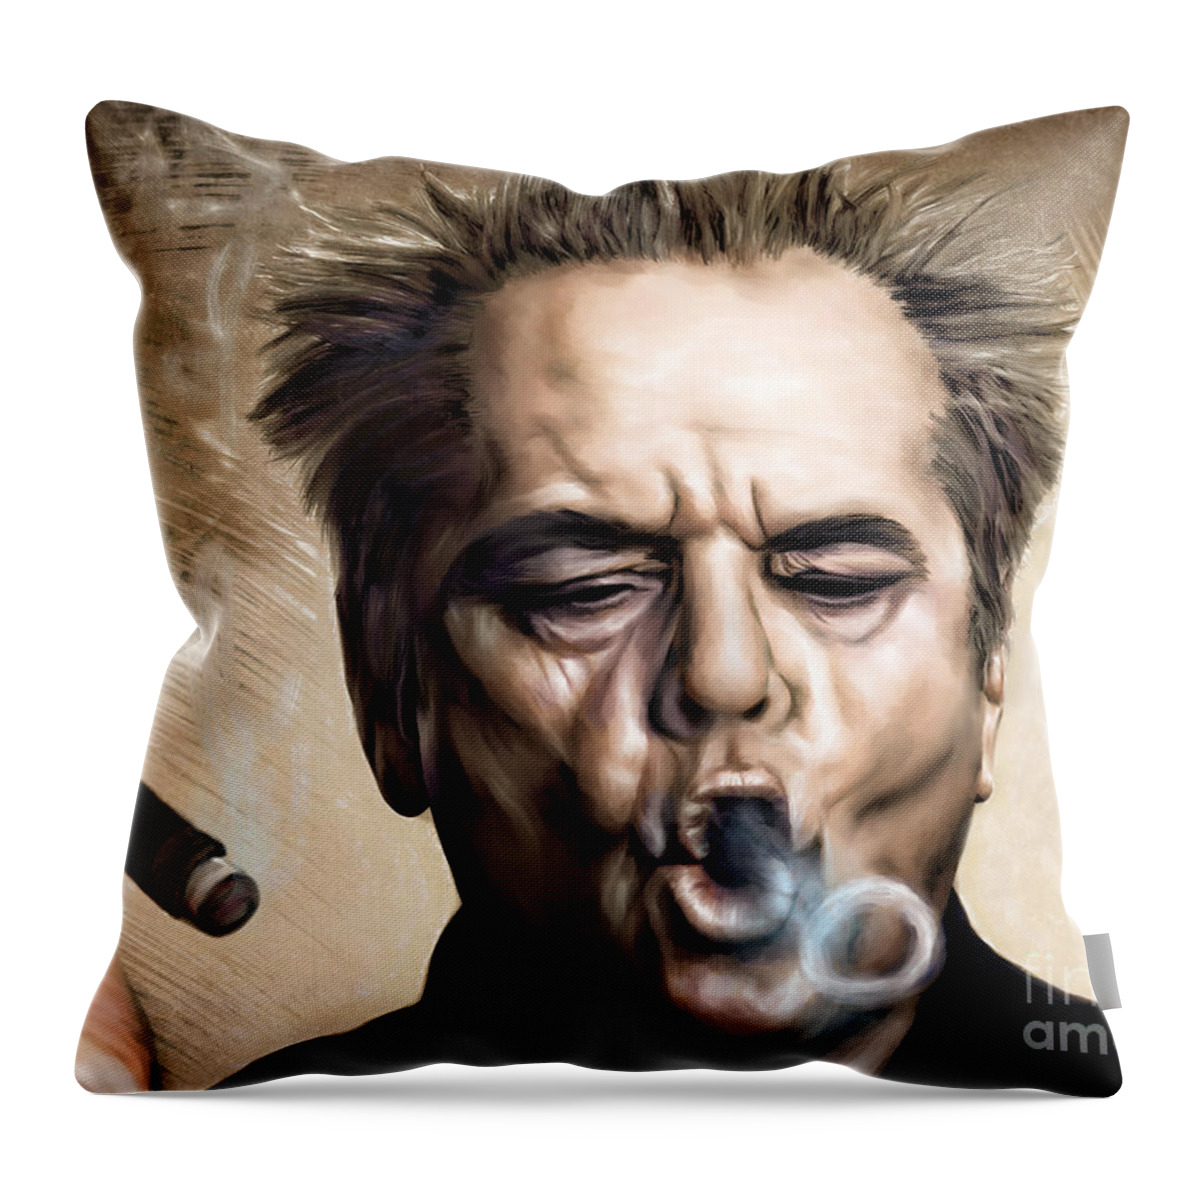 Actor Throw Pillow featuring the painting Jack Nicholson by Andrzej Szczerski